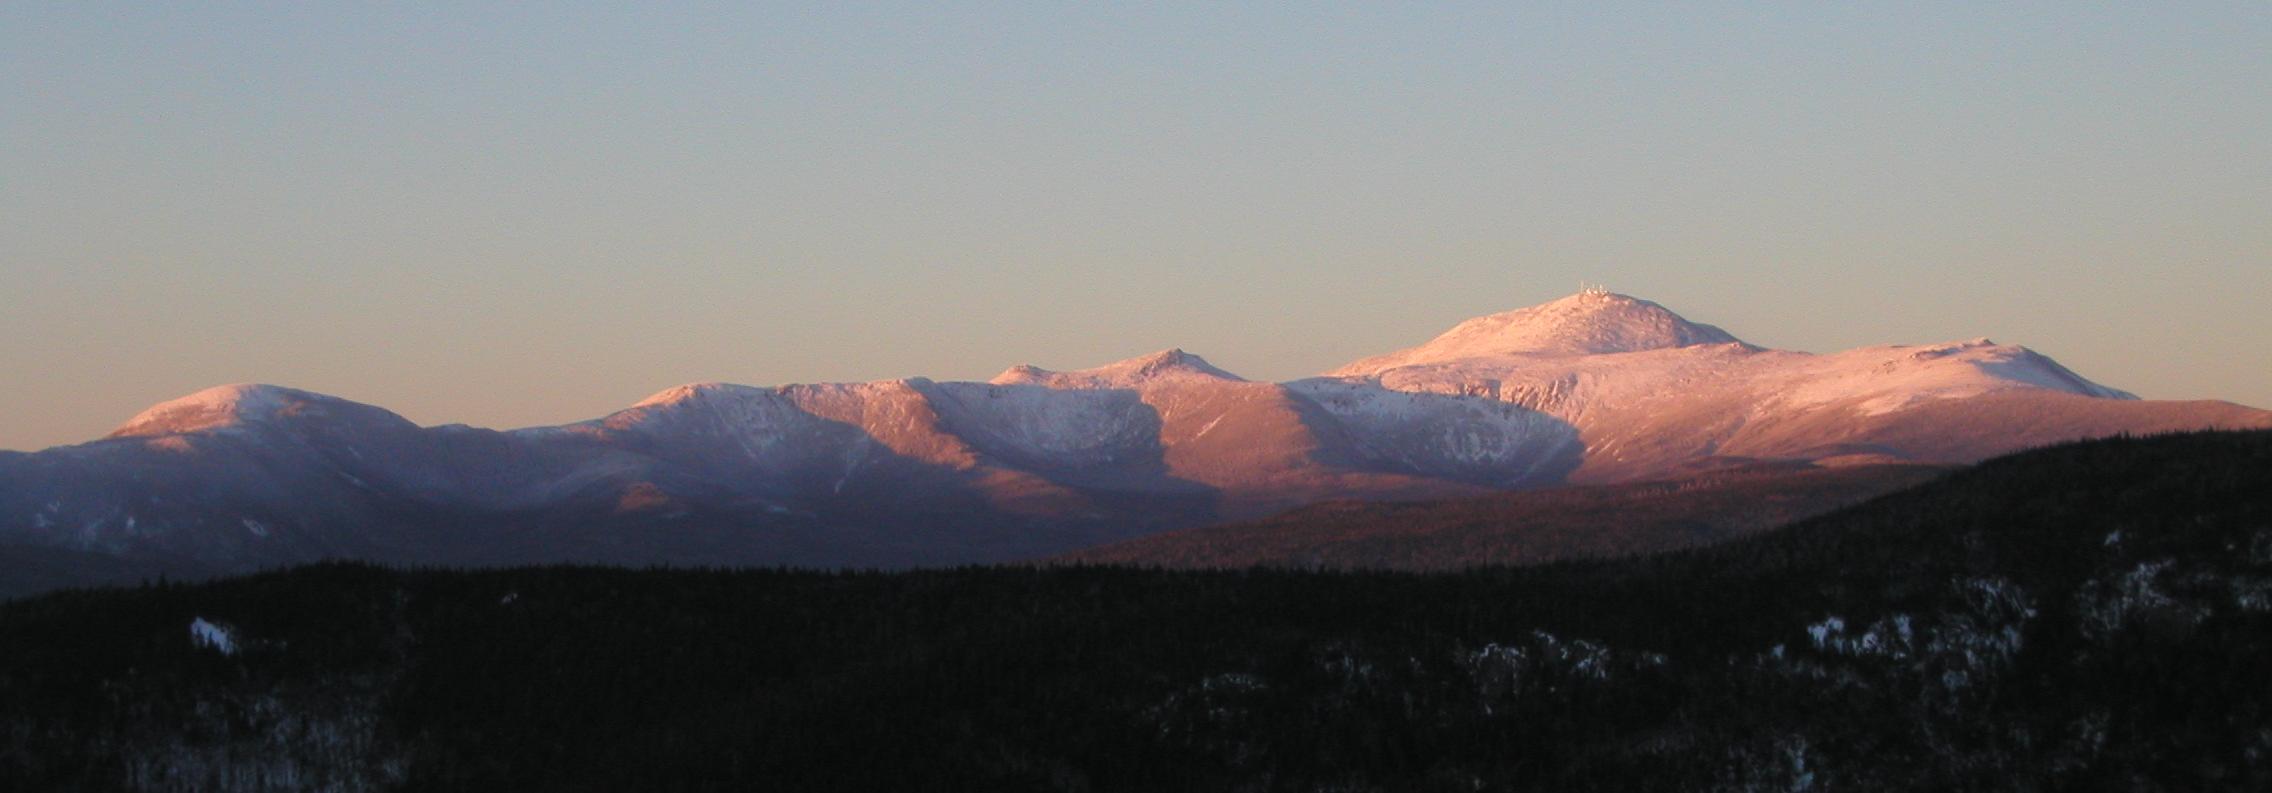 panoramic view of Mount Washington and the southern Presidential Range at sunset from Mount Crawford in New Hampshire